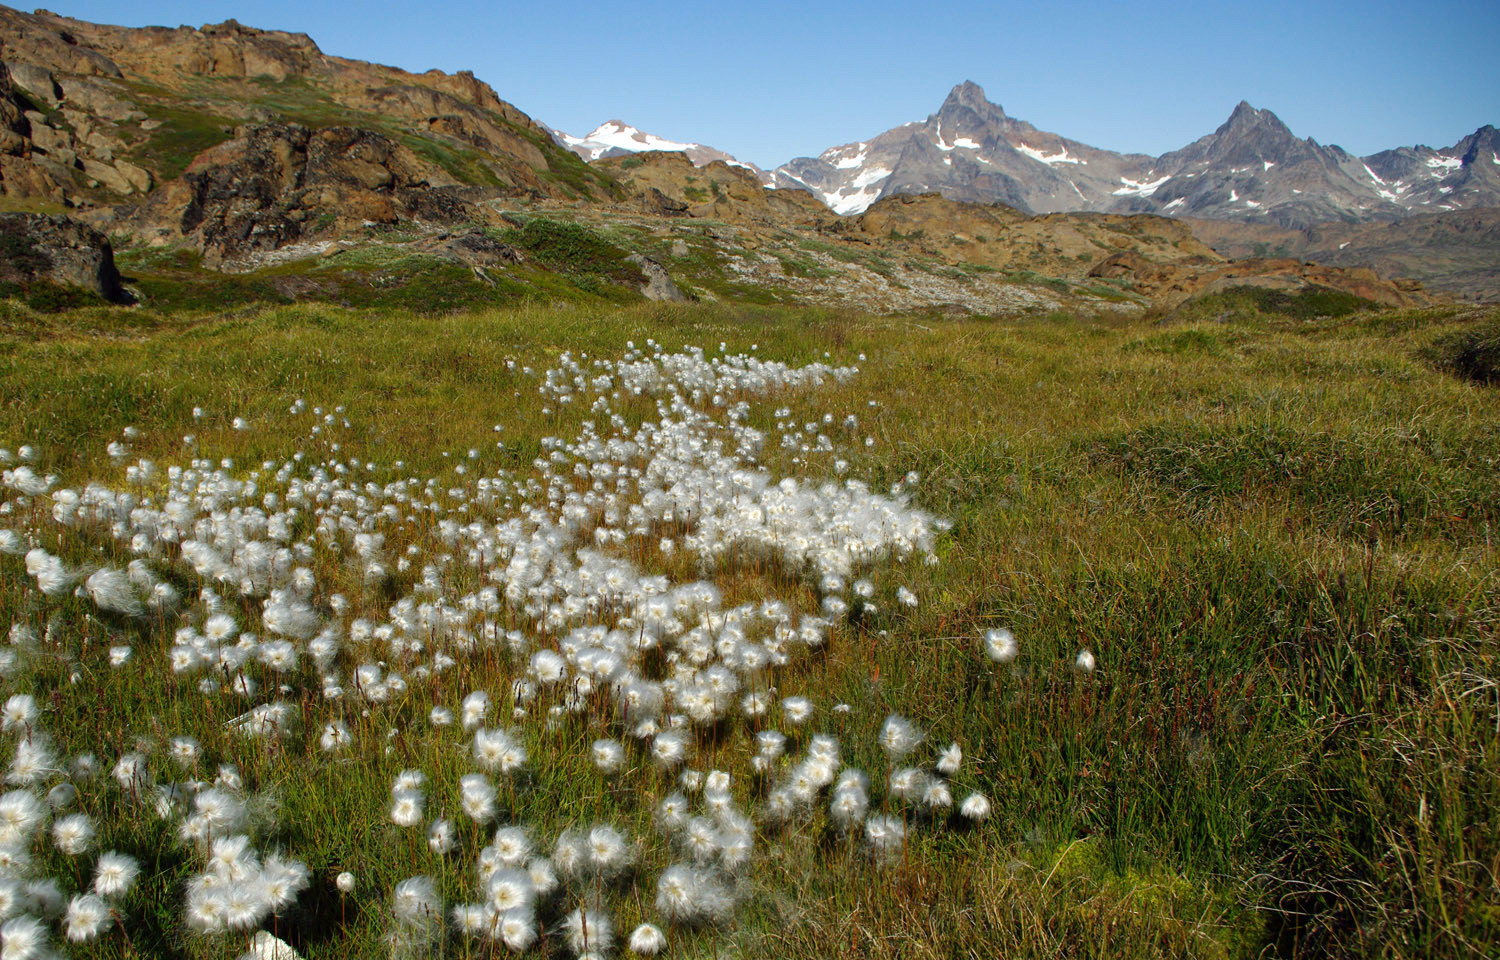 Cotton Grass and Mountains - Greenland, greenland, travel